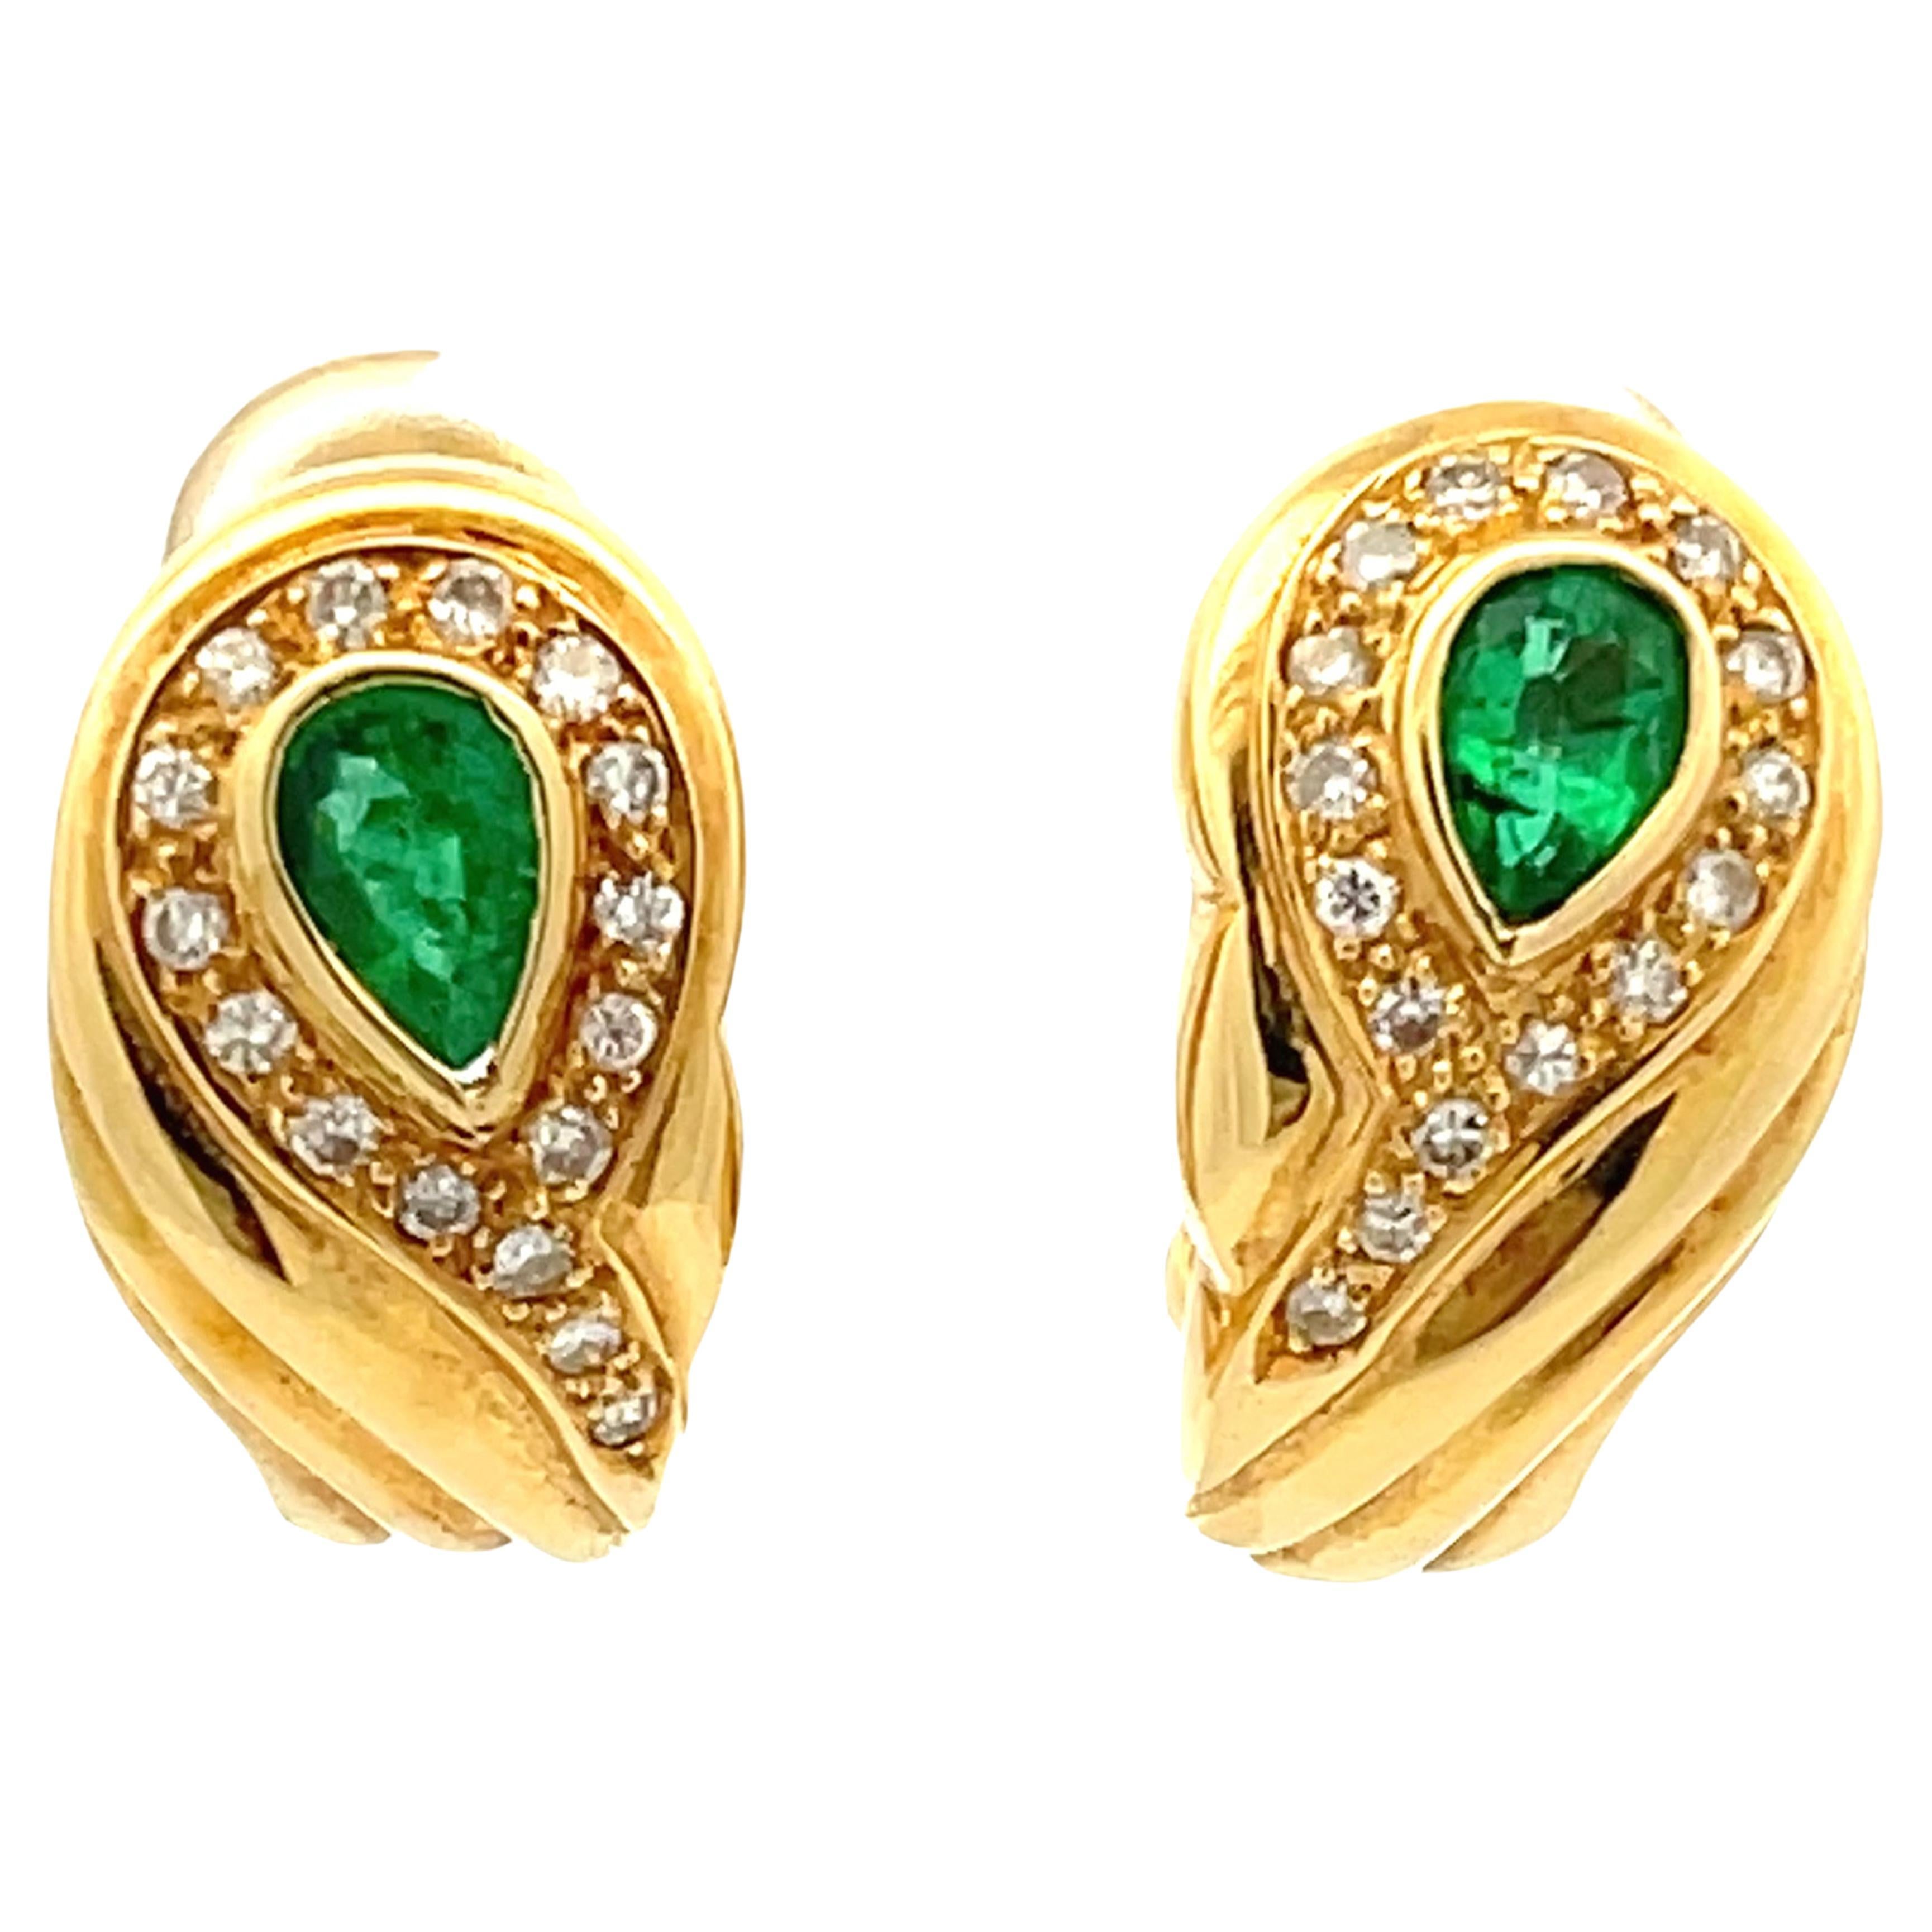 Pear Shaped Emerald and Diamond Huggie Earrings in 18k Yellow Gold